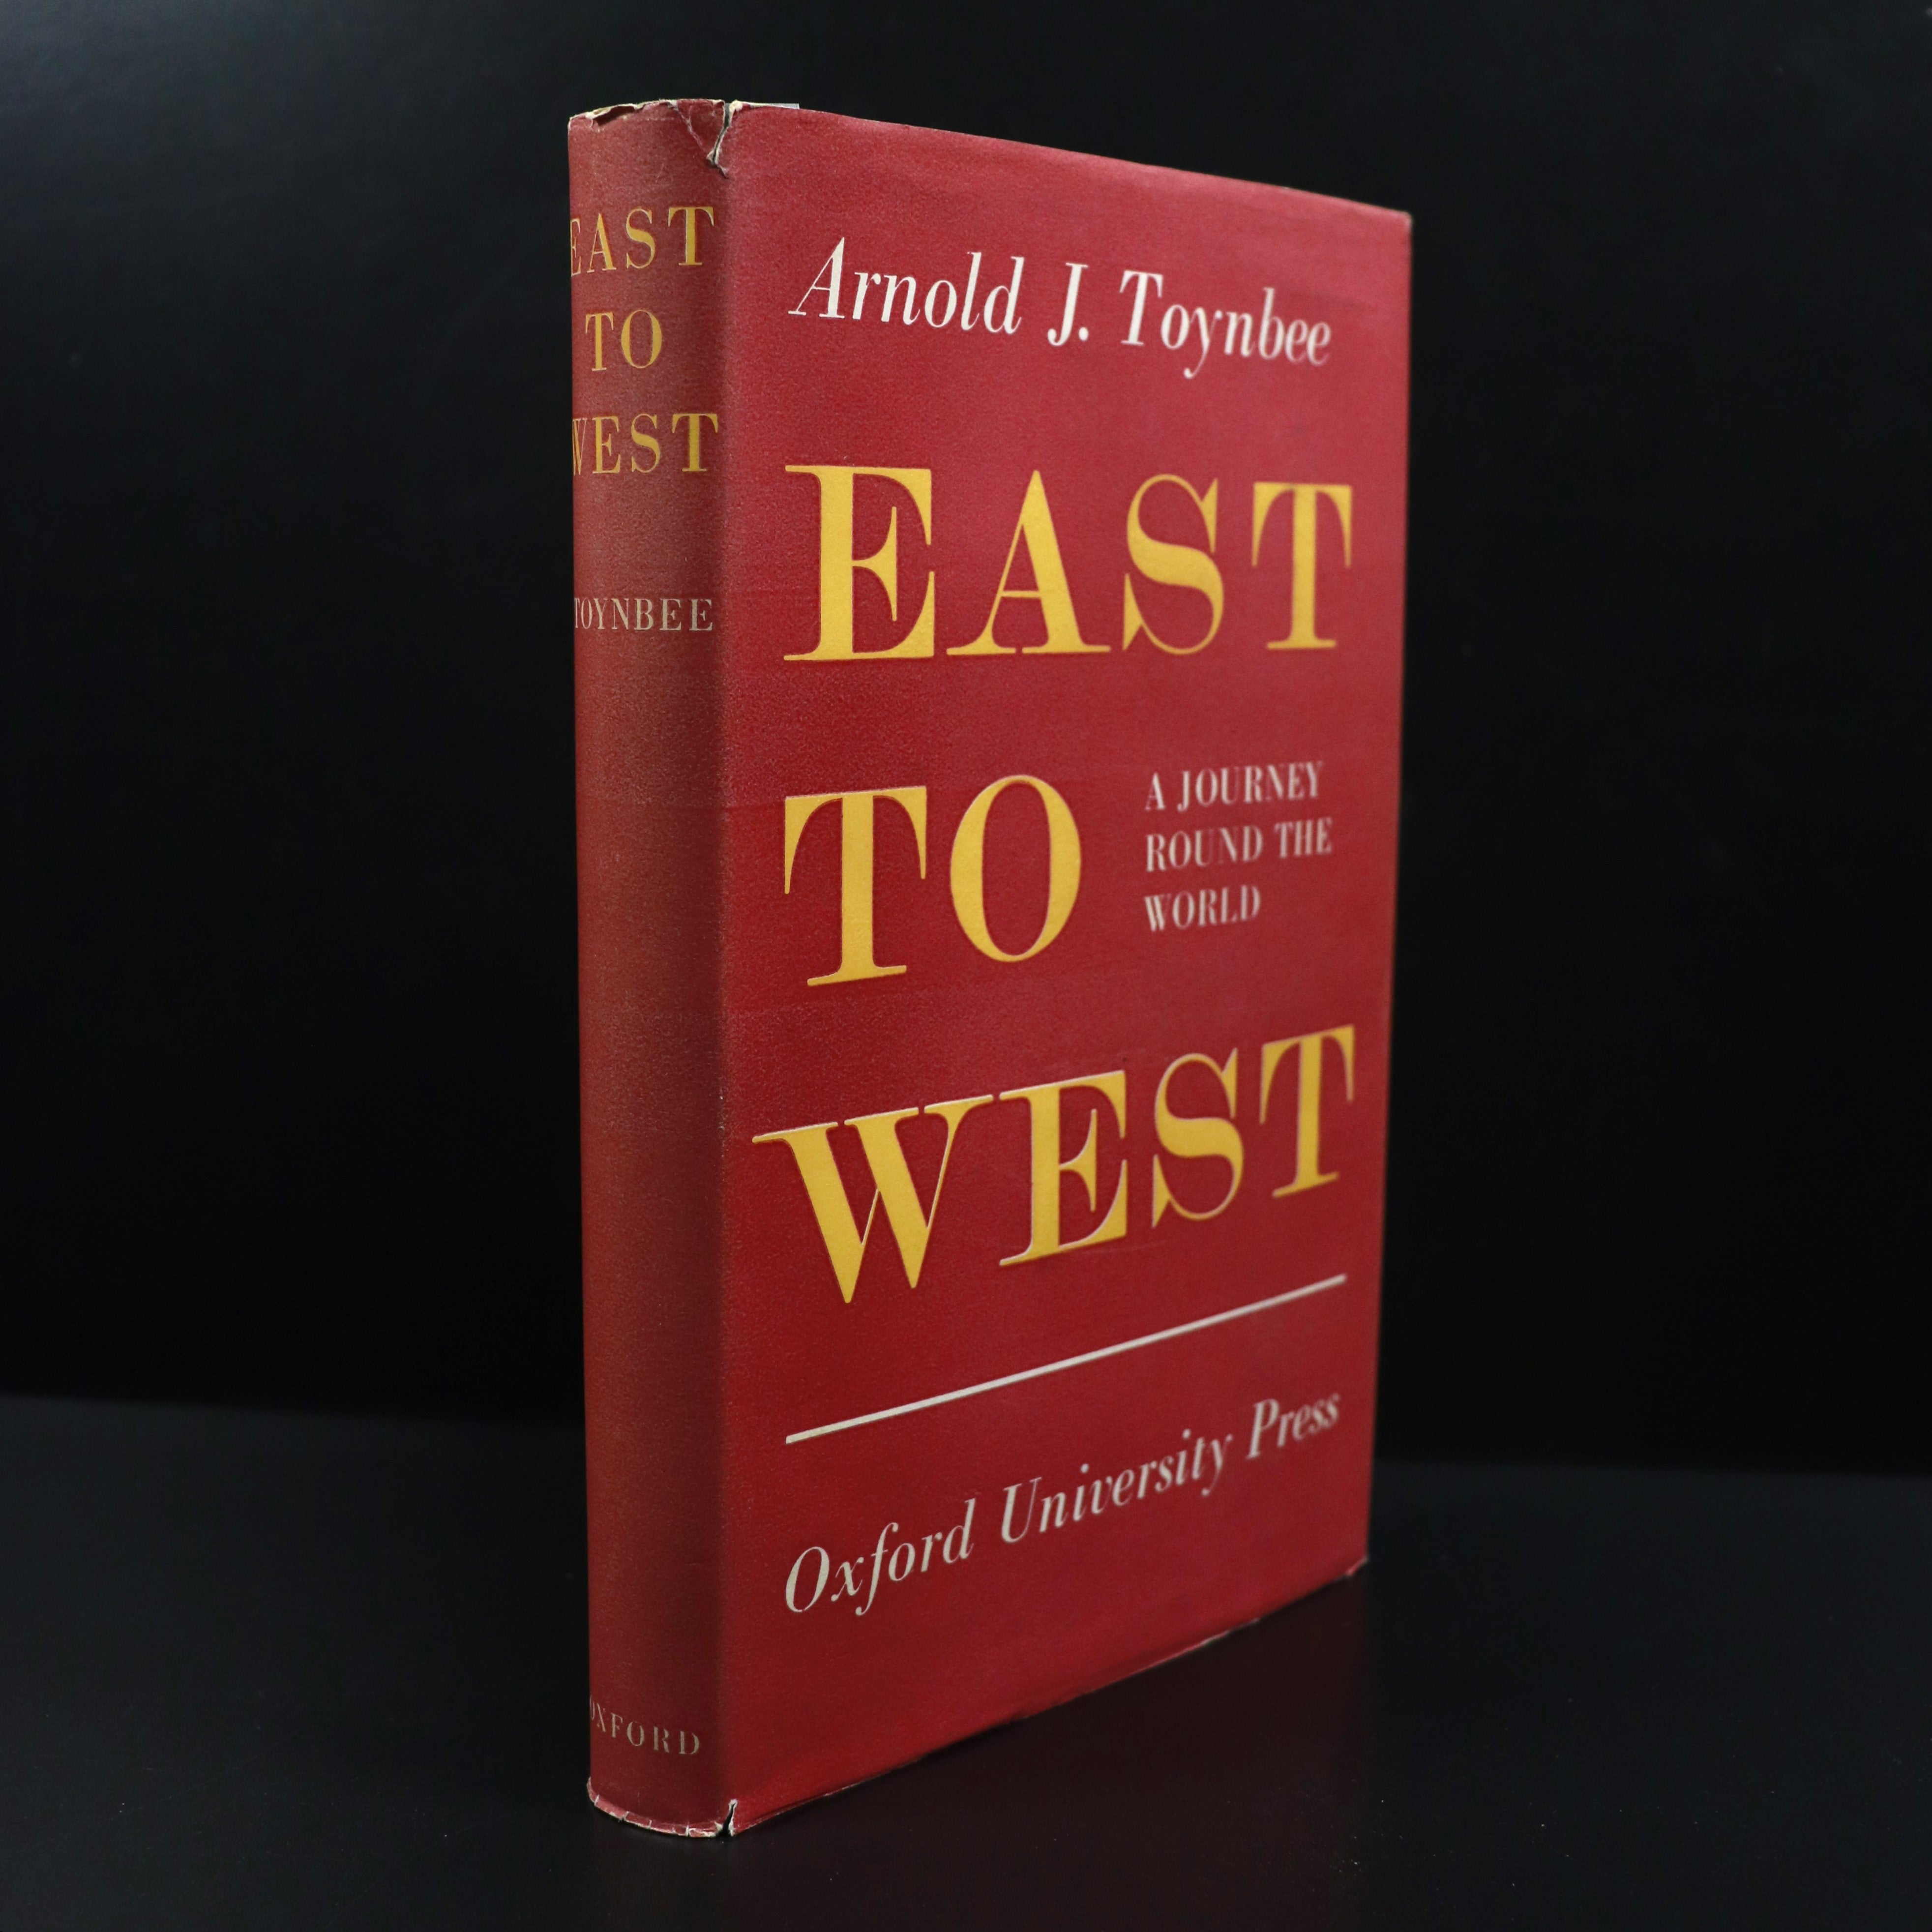 1958 East To West Journey Around The World A.J. Toynbee Vintage Travel Book